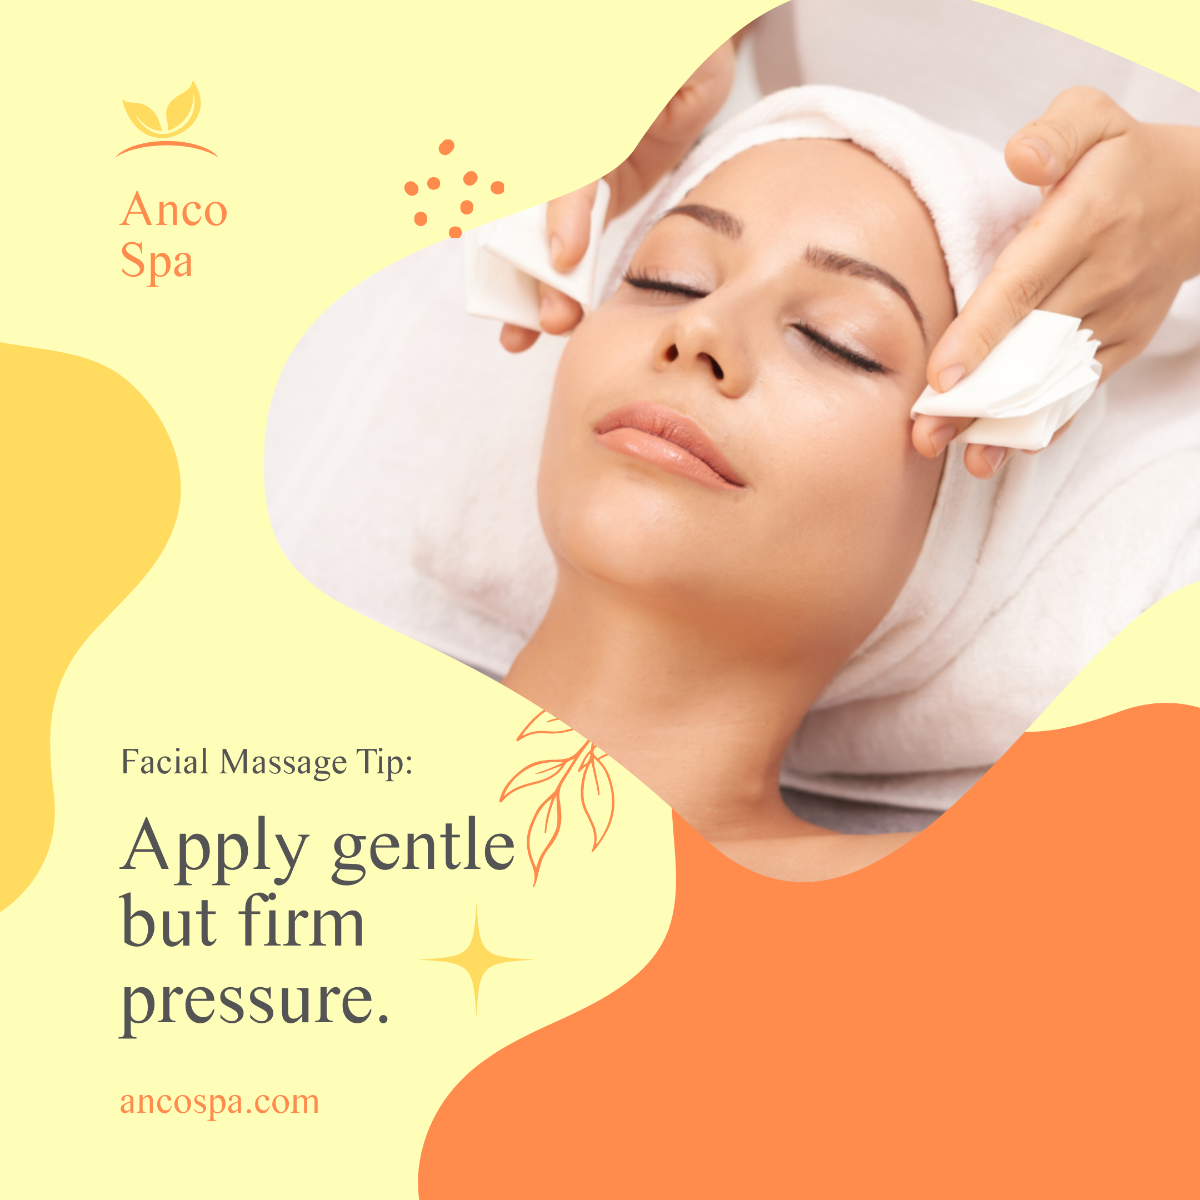 Free Facial Massage Tips And Tricks Post, Instagram, Facebook Template